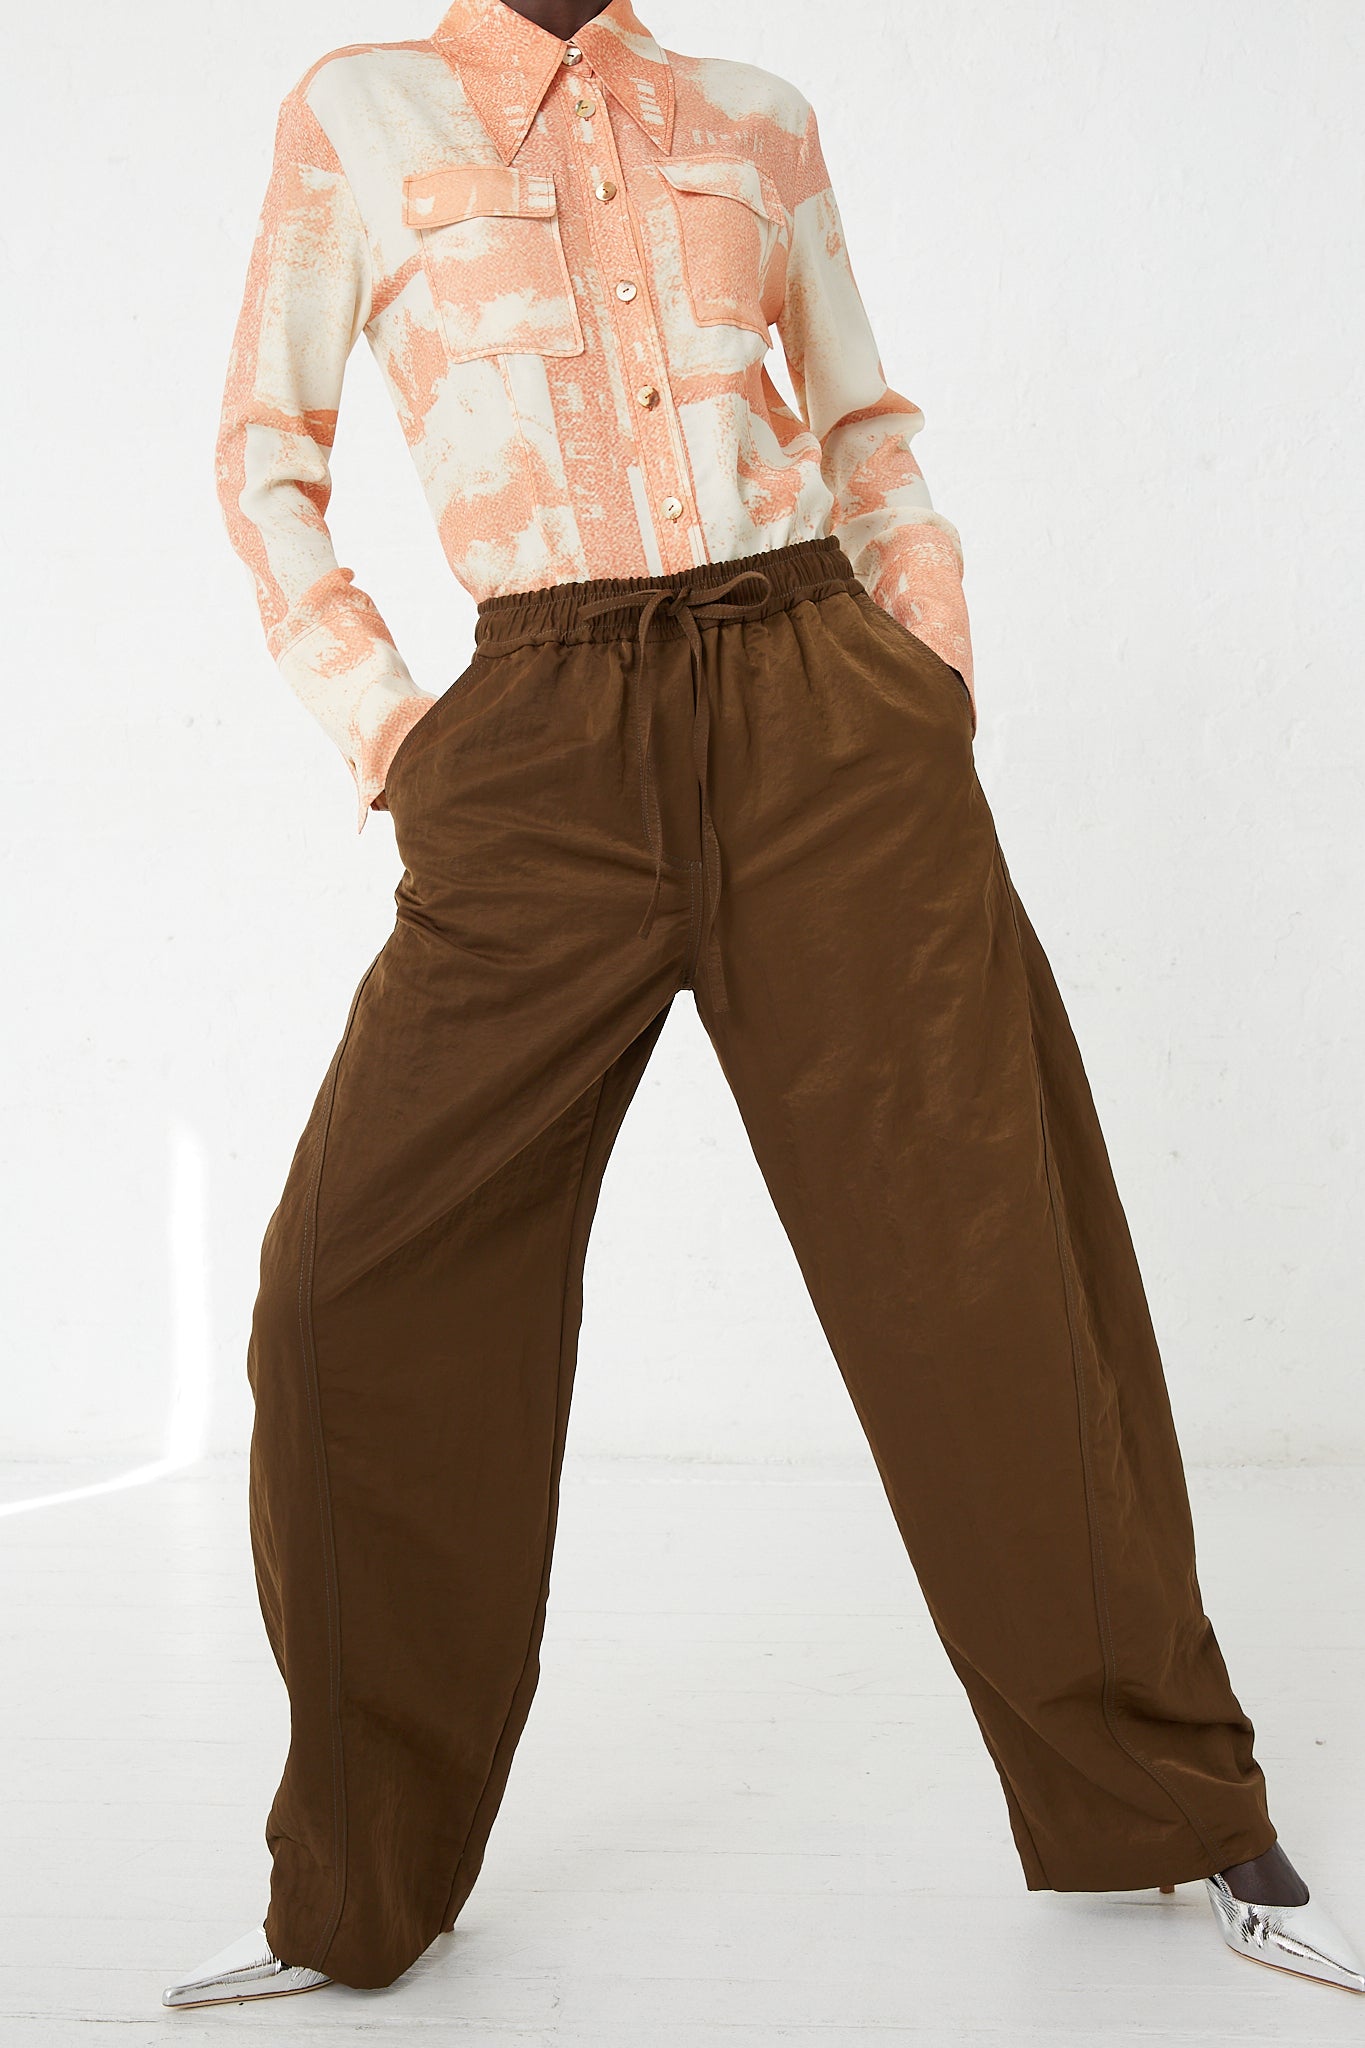 A woman wearing Rejina Pyo's Nylon Una Trousers in Brown with an elasticated waist.